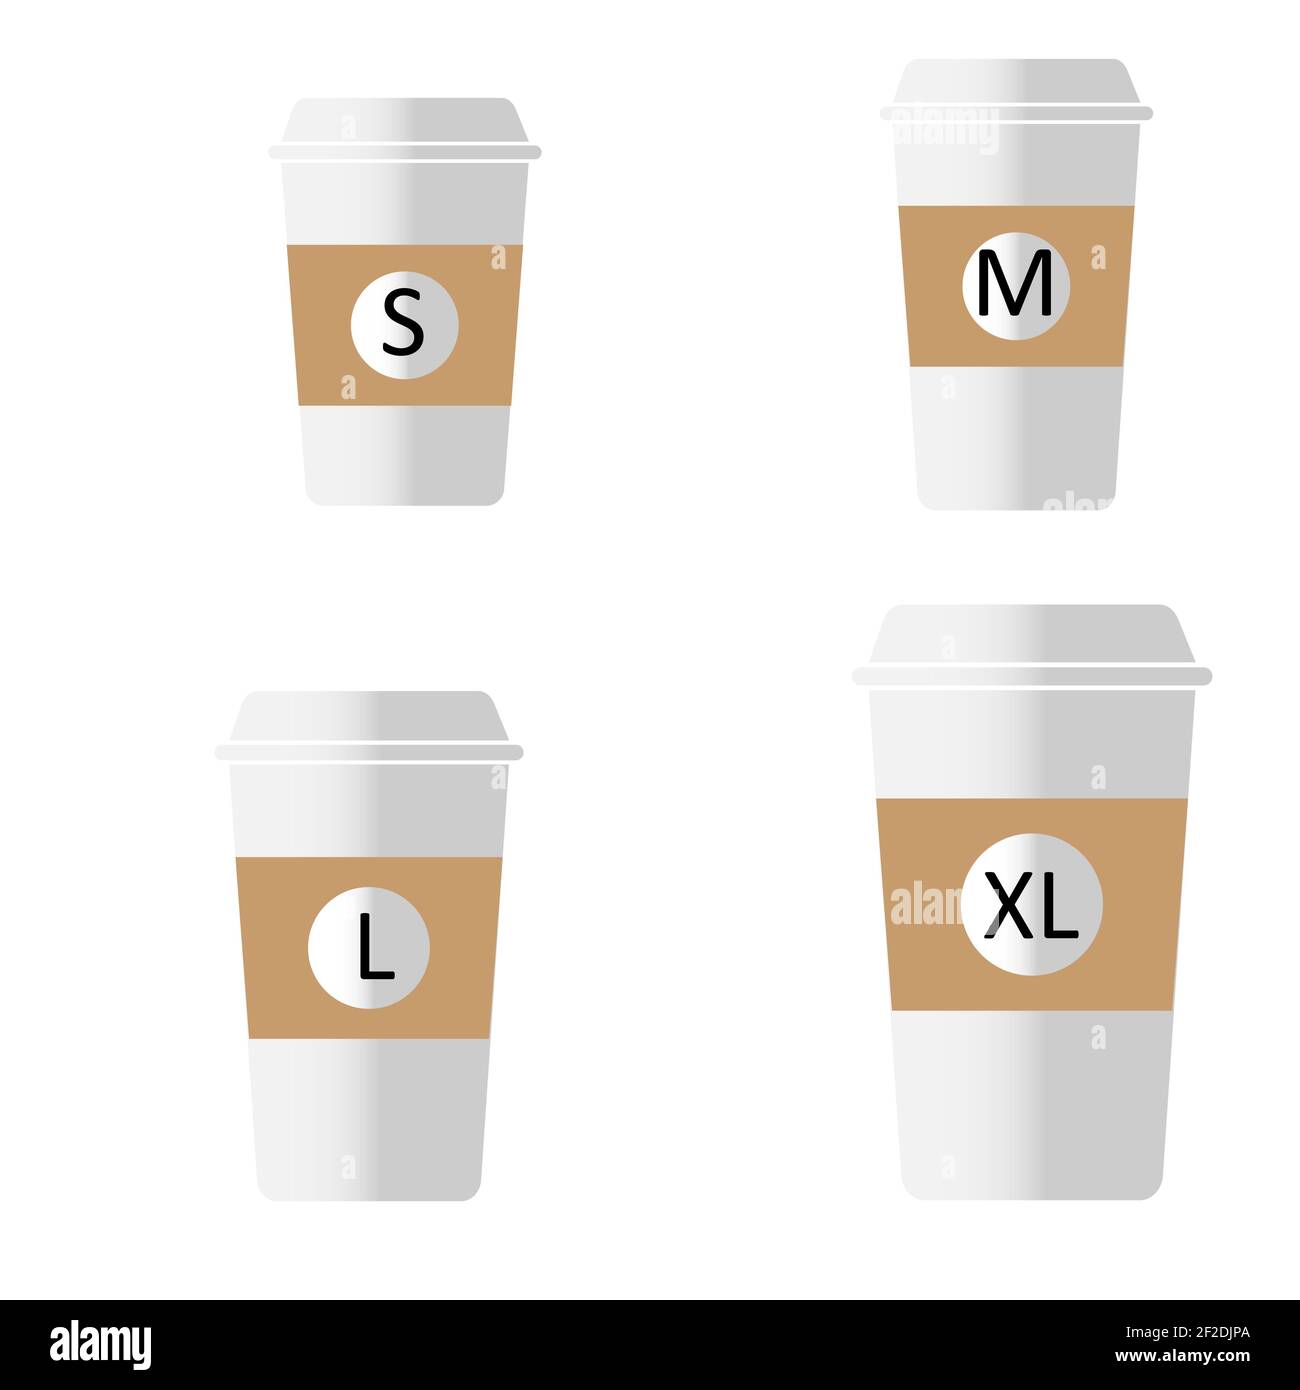 coffee to go different sizes sign. flat style. Coffee cup size S M L XL icons on white background. take-away hot cup sizes symbol. different size - sm Stock Photo